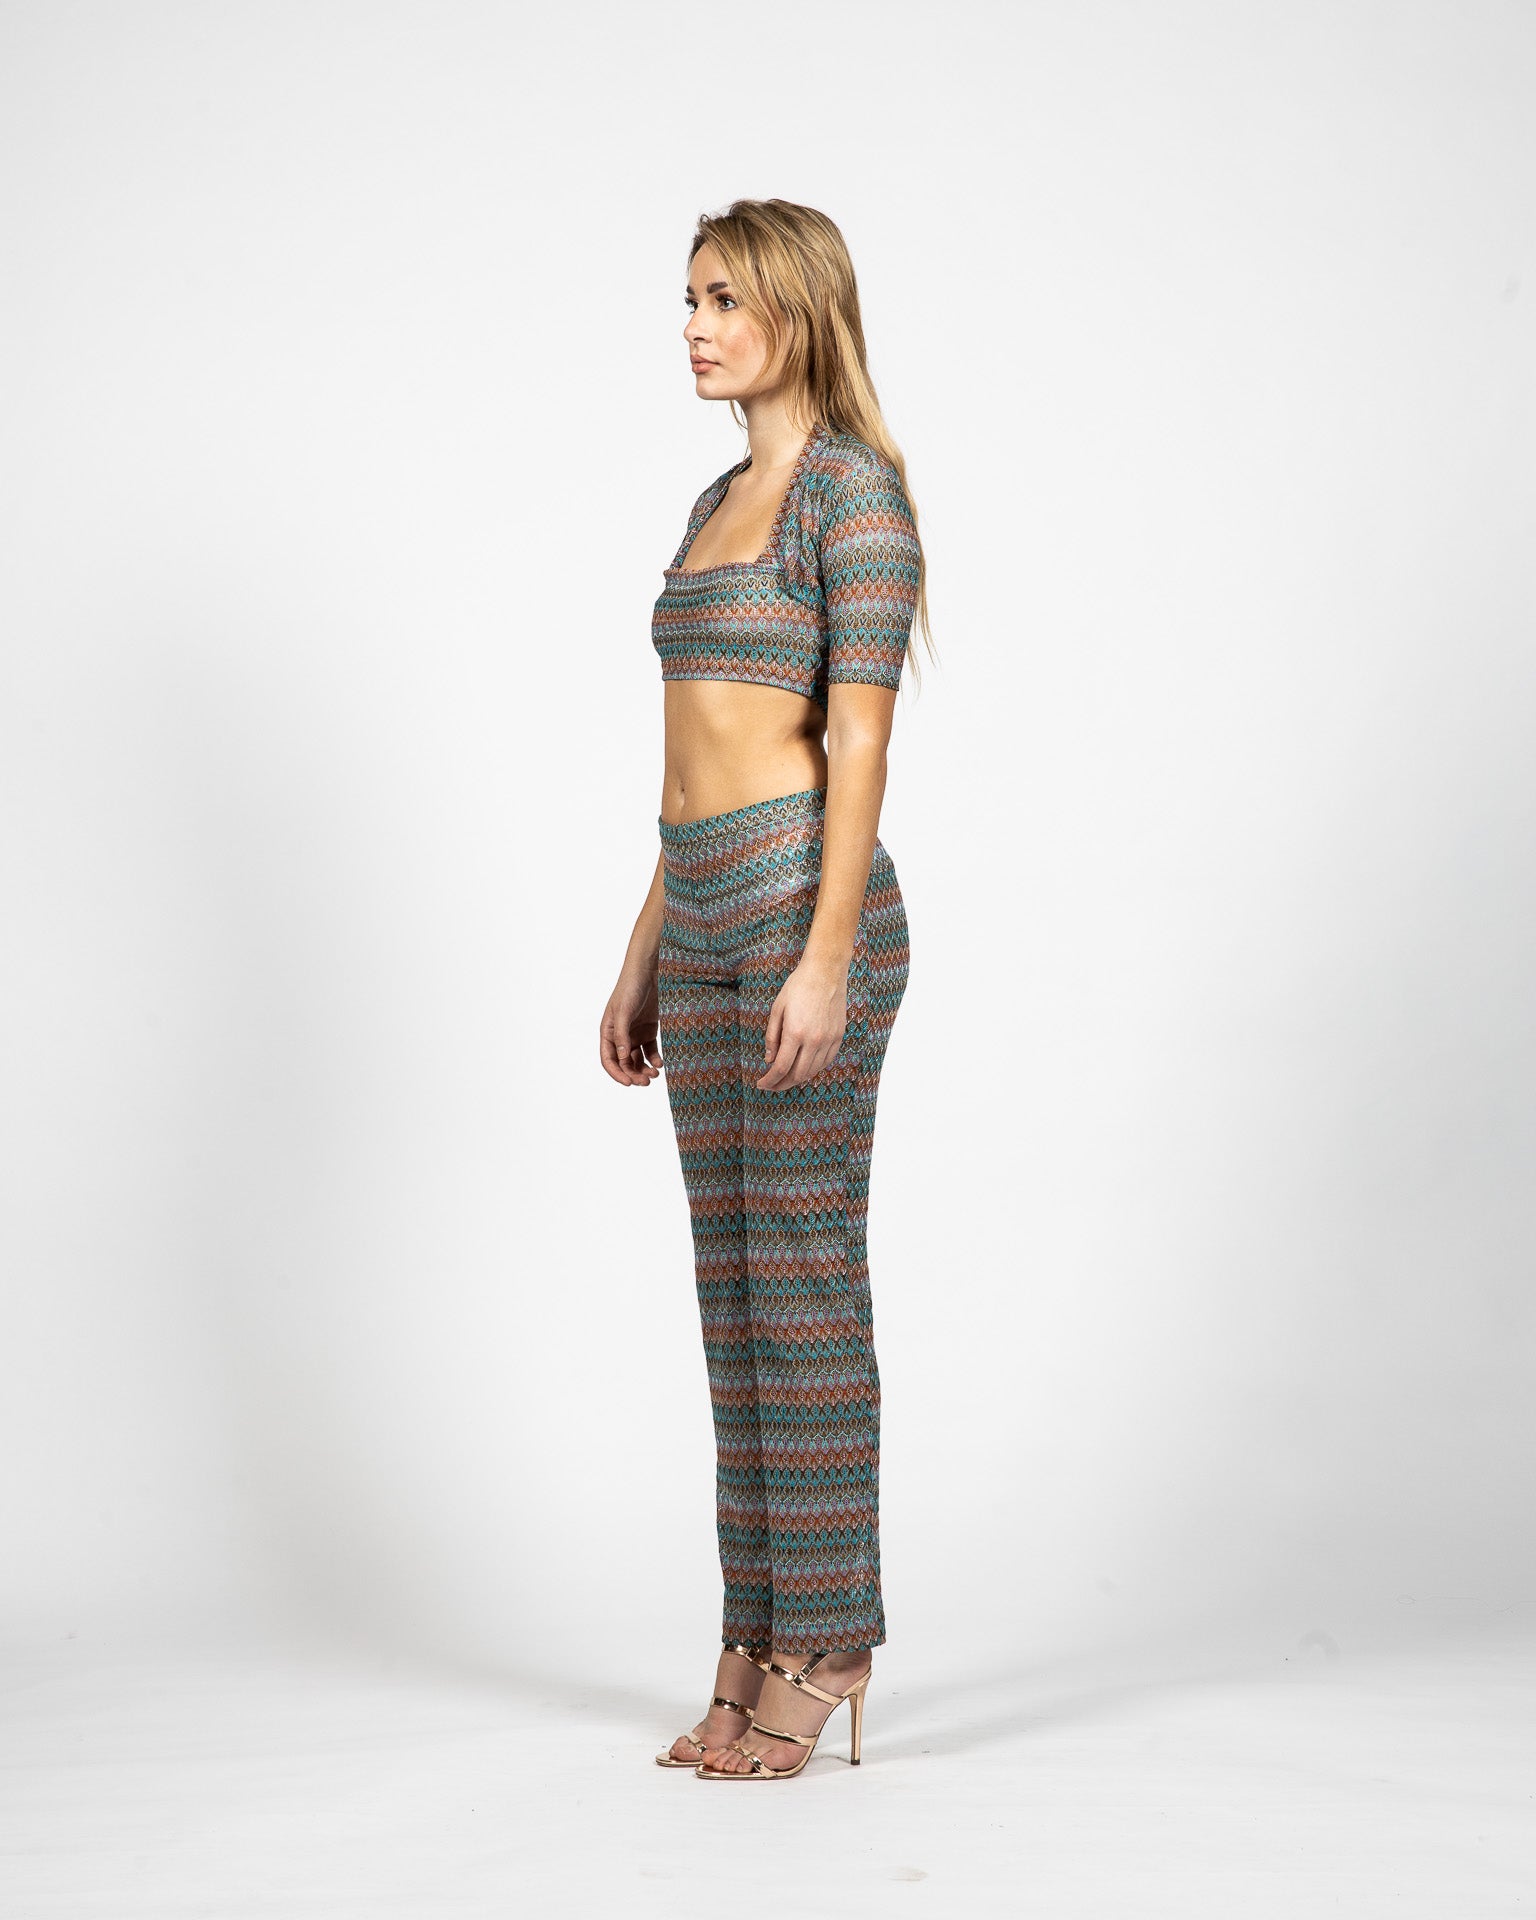 Cropped halter top, bolero shrug, cropped top with long sleeves with matching stretch pants - Side View - Samuel Vartan